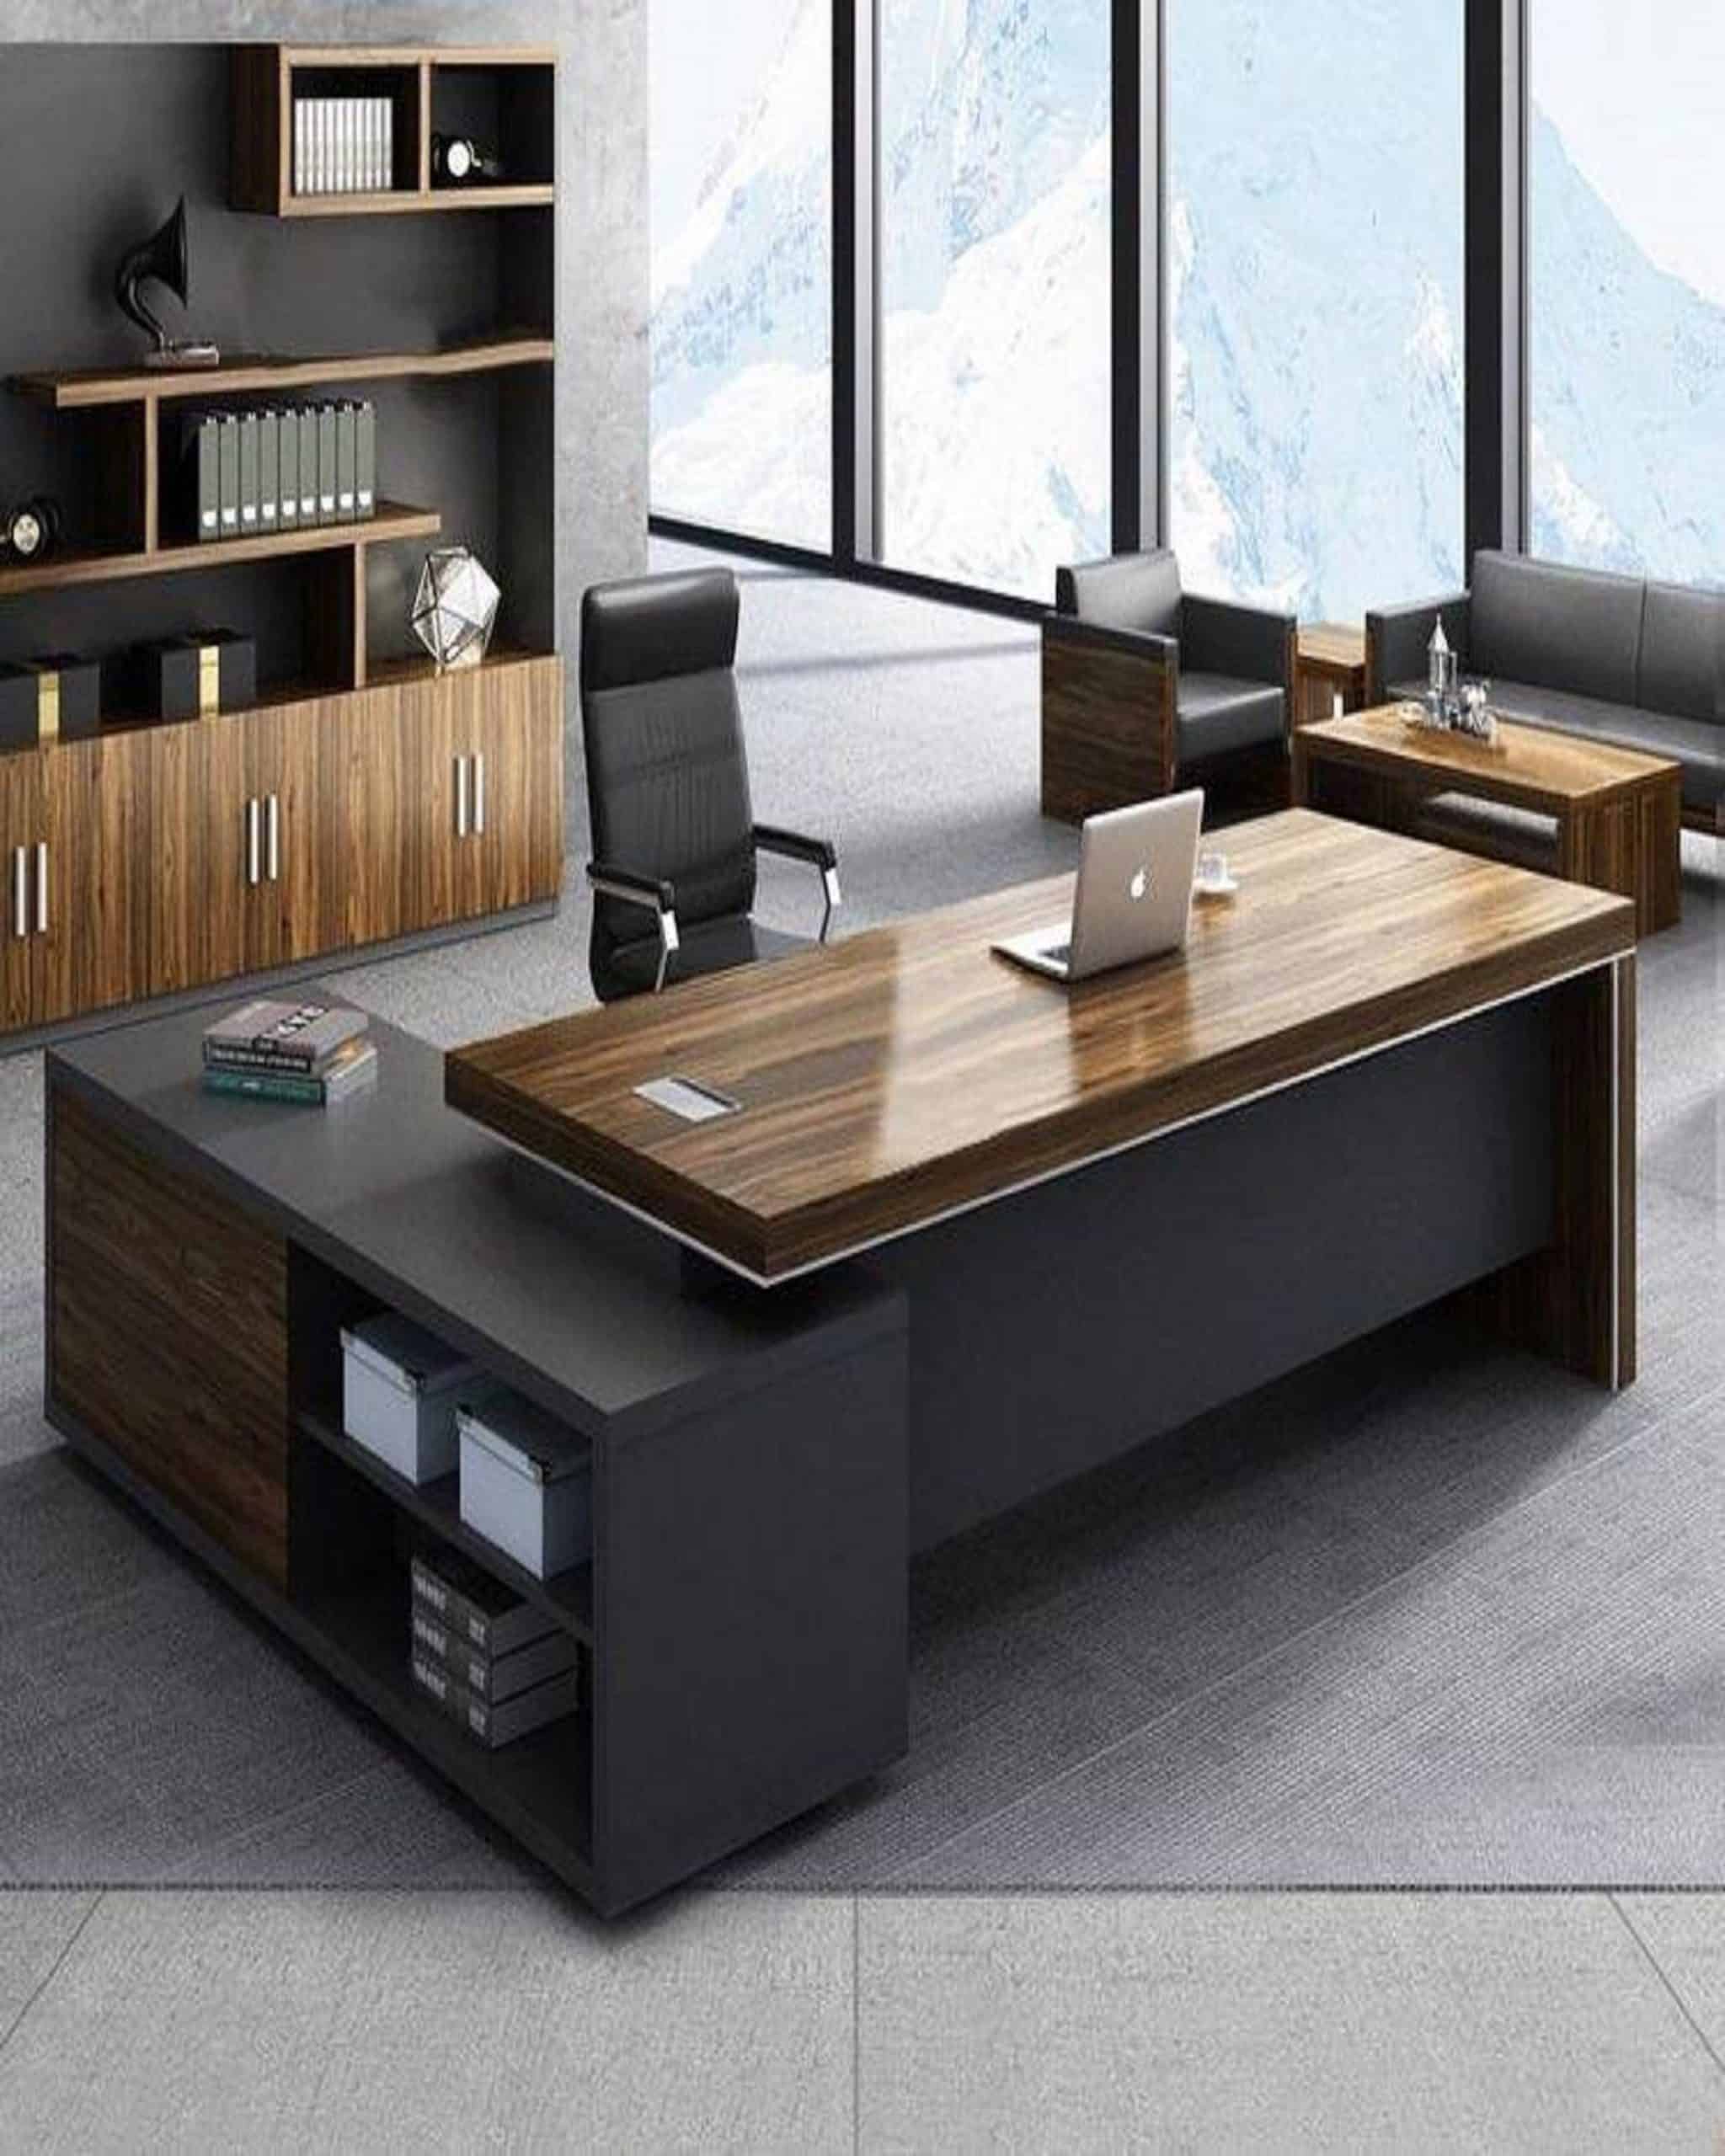 Luxury Boss Office Table Design - Decorated Office